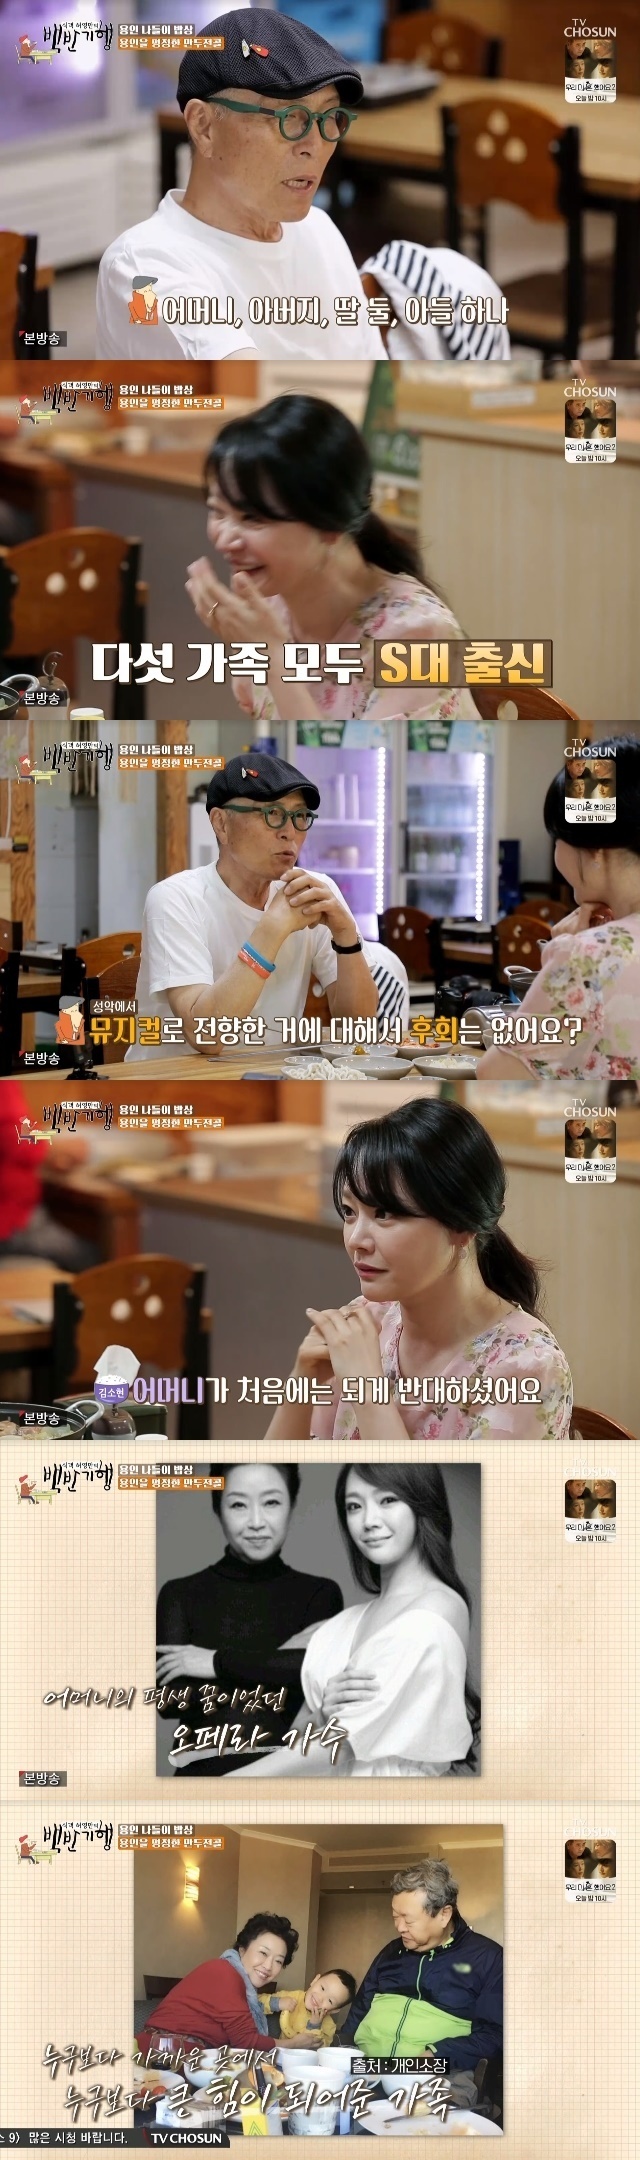 Kim So-hyun reported the opposition to the family environment from prestigious universities and the parents musical actor conversion.In the 158th episode of the TV Chosun Huh Young Mans Food Travel (hereinafter referred to as White Travel) broadcast on July 1, musical actor Kim So-hyun joined the Yongin esophagus trip in Gyeonggi Province.On this day, Huh Young-man asked how Kim So-hyun went to Vocal Music, referring to his native to Vocal Music.Kim So-hyun said, My mother majored in Vocal music, he said. My sister and I both played Vocal music.Didnt you say all the family was Seoul National University? said Huh Young-man, who was embarrassed by Kim So-hyun, saying, Oh yes, Ill talk about it here.Kim So-hyuns family were from Seoul National University, with two mothers, two daughters, and five sons.Huh Young-man wondered if he had any regrets about his turn to musical, with Kim So-hyun saying: My mother objected.She dreamed of becoming an opera singer her whole life, but she couldnt study abroad when she married her father. She wanted me to go that way (instead).I do debut and perform often. I am performing, but the person who manages it outside the stage has just debut, but it seems that Stoker has appeared.A middle-aged woman came to the lobby every time I performed, and she was looking at me, and when she found out that she was wearing a scarf on her head and shaking at the monitor, she prayed.I misunderstood it as Stoker, so I was tearful. I wanted to know what kind of mind it was. 